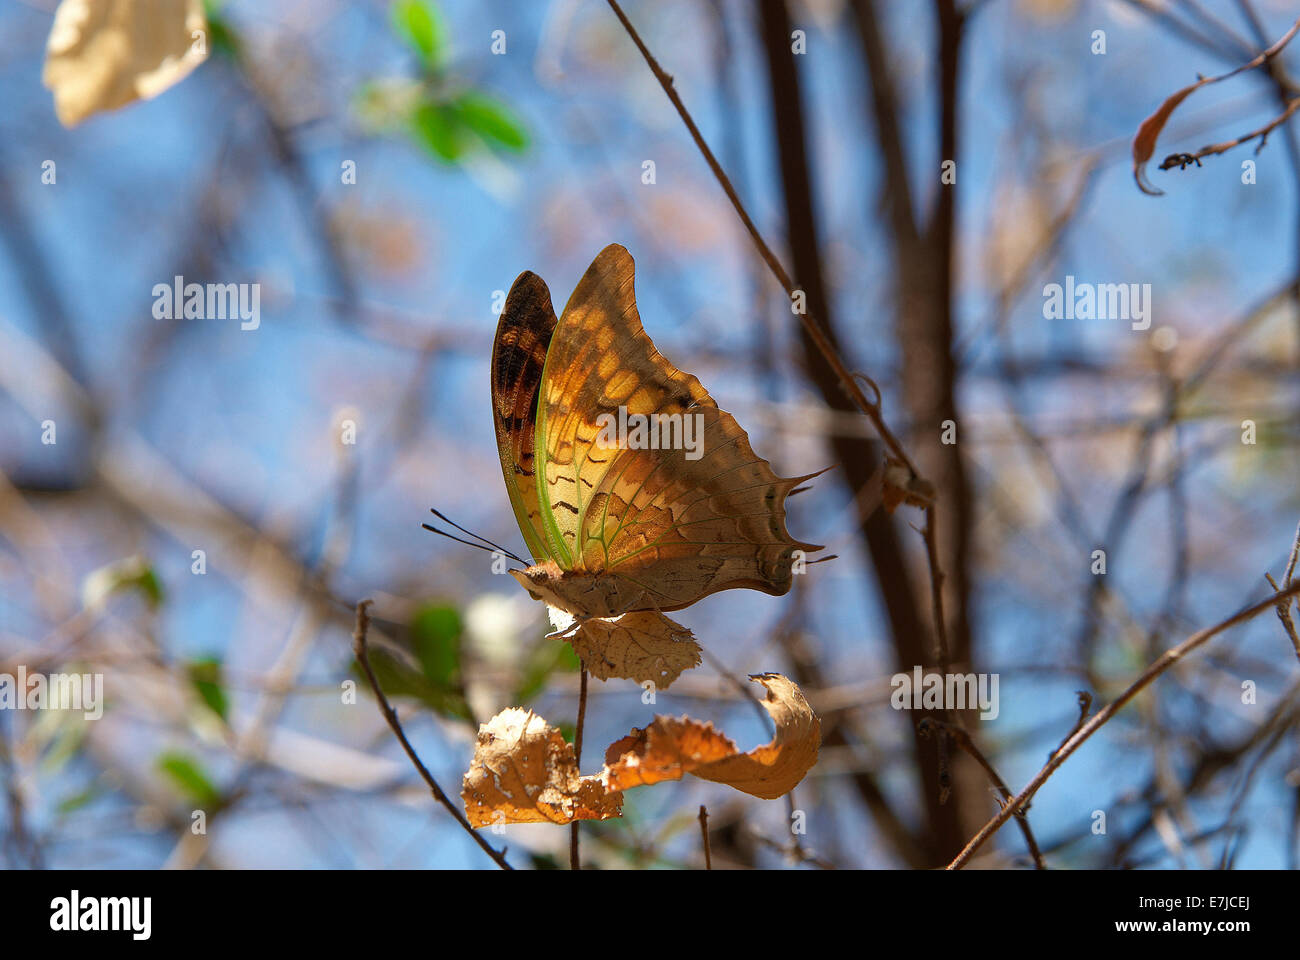 Africa, Namibia, butterfly, mountain Water, insect, Stock Photo